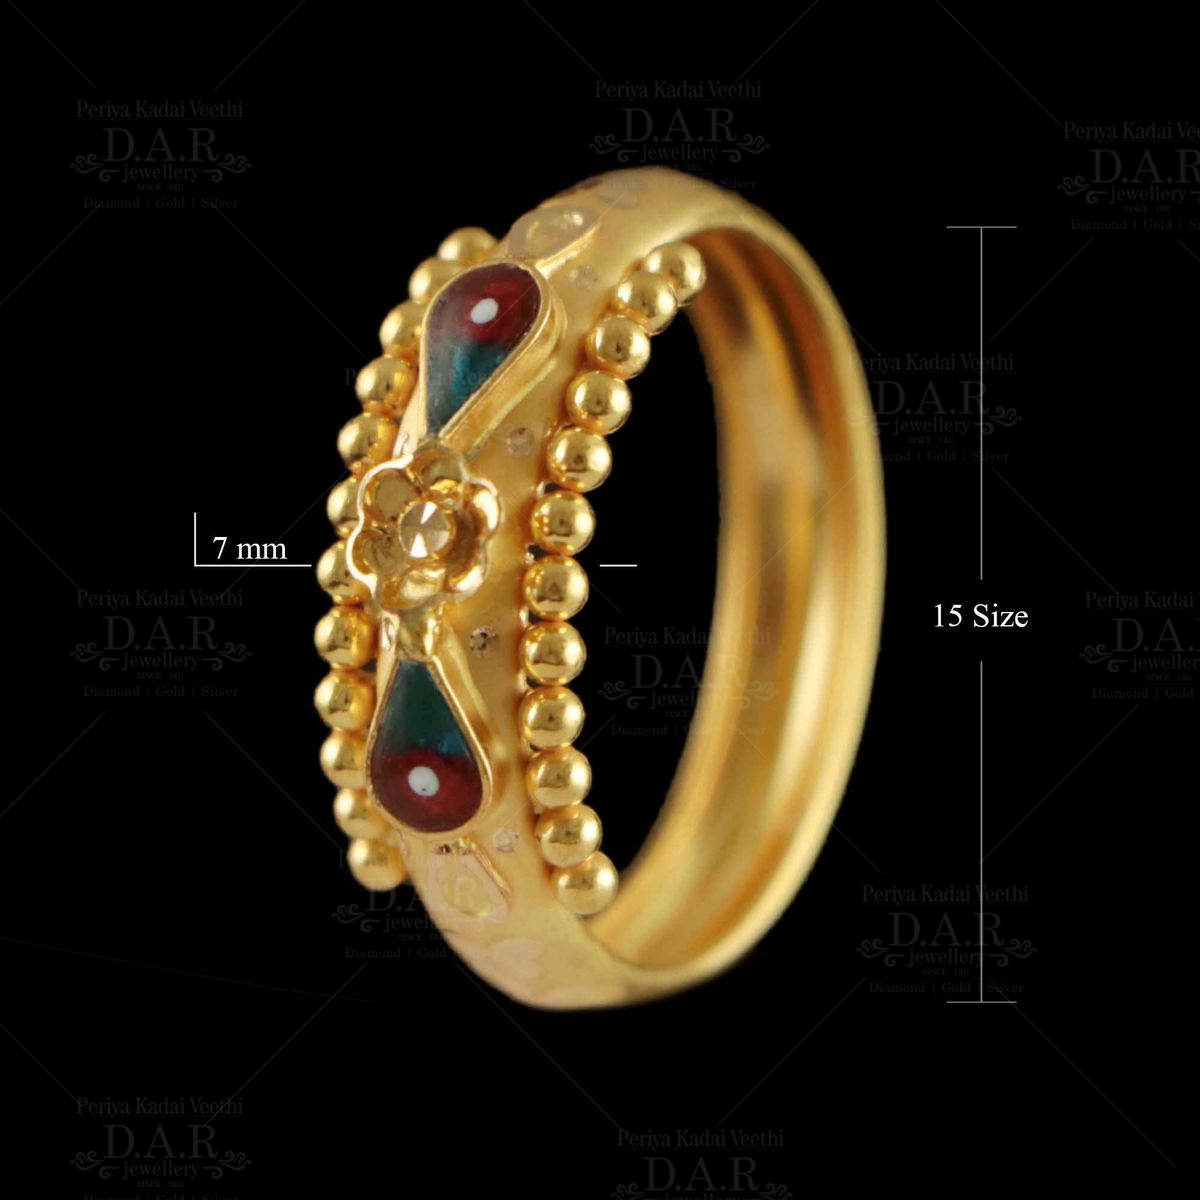 Certified 3-10ct Red Coral Trillion Shape Gemstone Mantra Panchdhatu Ring  for Mangal Dosh Triangle Birthstone Astrology Jewelry - Etsy